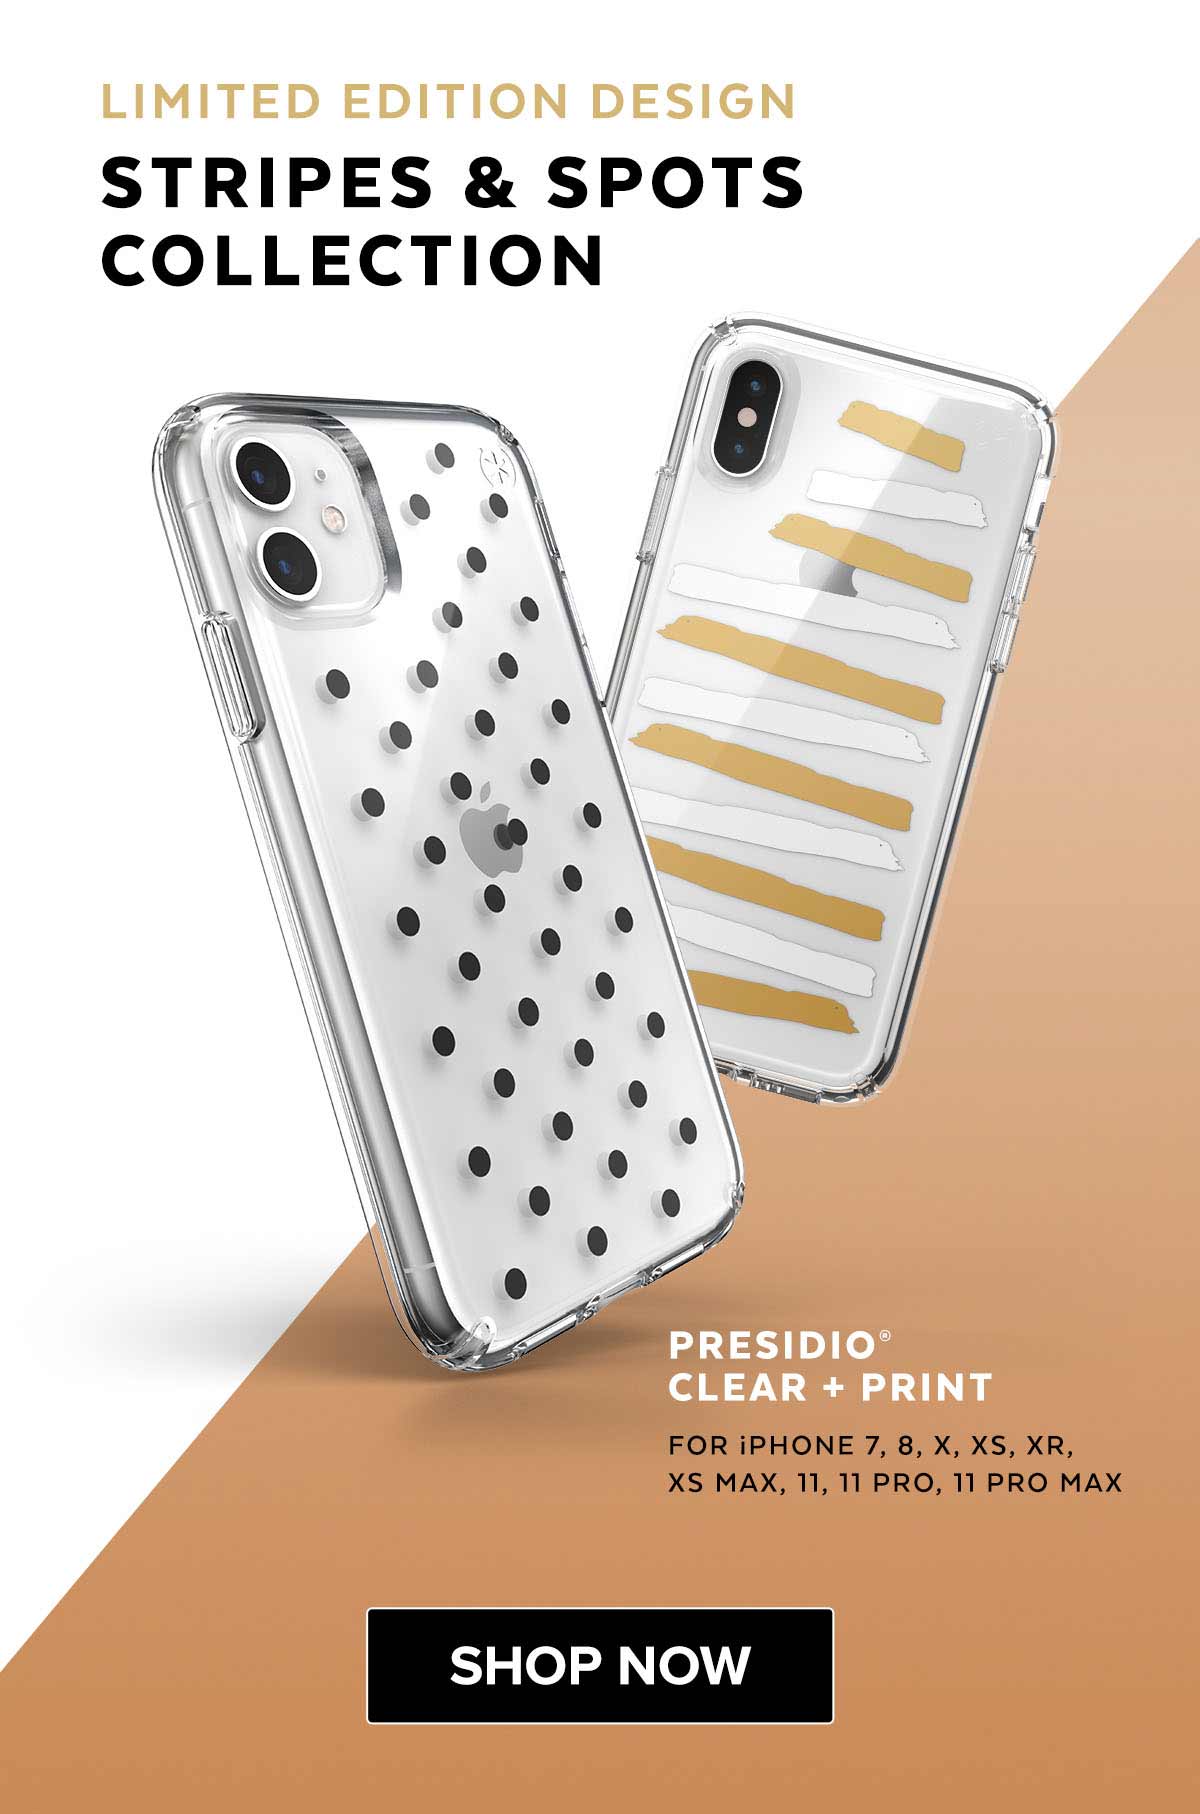 Limited edition design stripes & spots collection. Presidio Clear + Print for iPhone 7, 8 X, XS, XR, XS Max, 11, 11 Pro, and 11 Pro Max. Shop now.